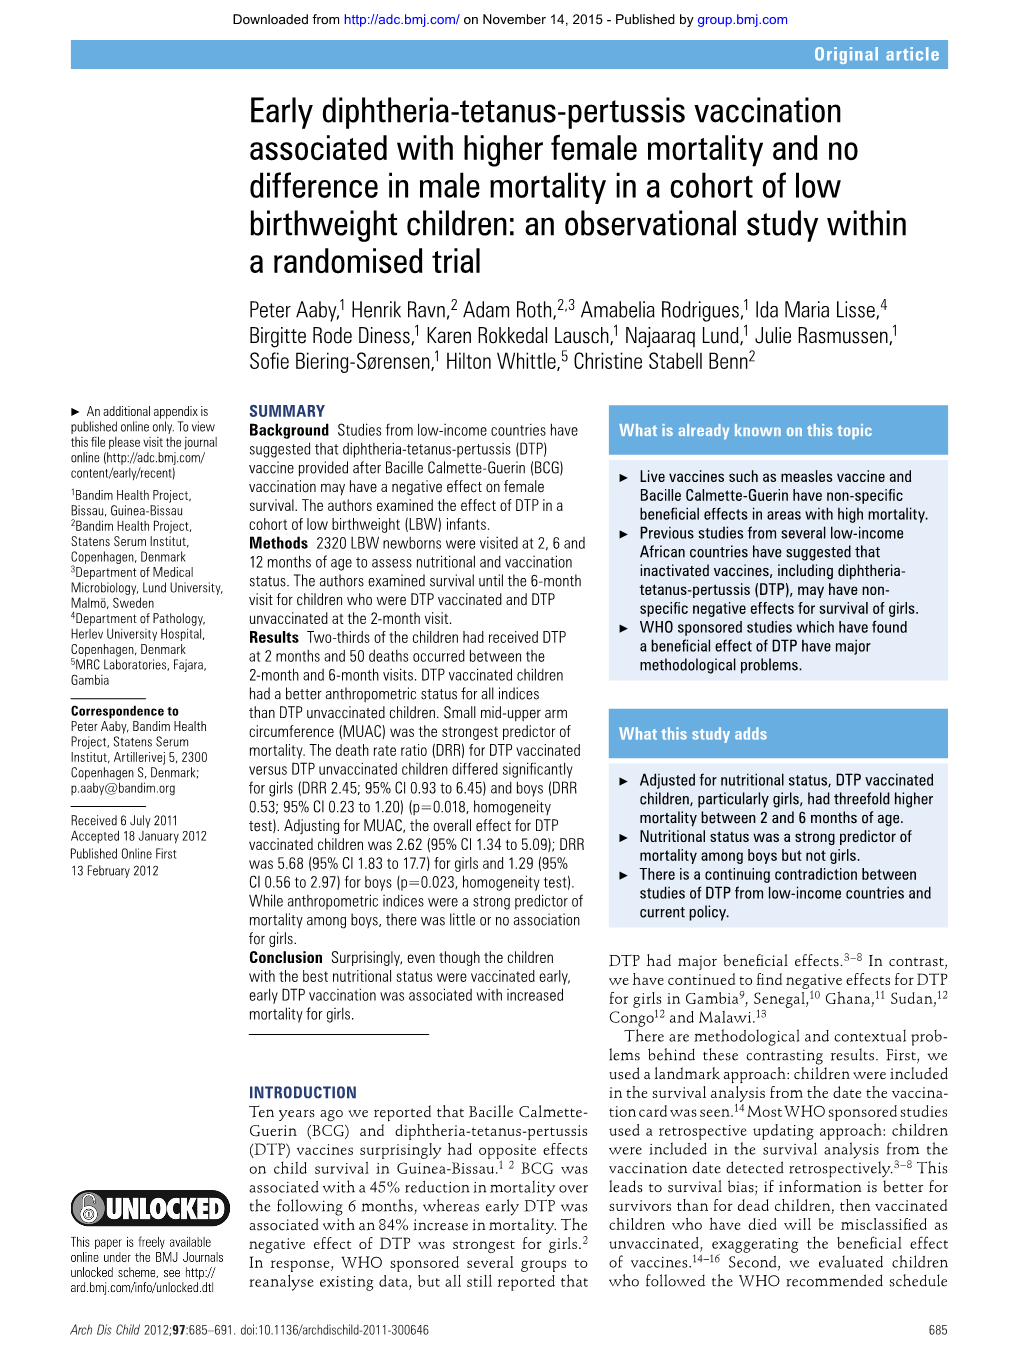 Early Diphtheria-Tetanus-Pertussis Vaccination Associated with Higher